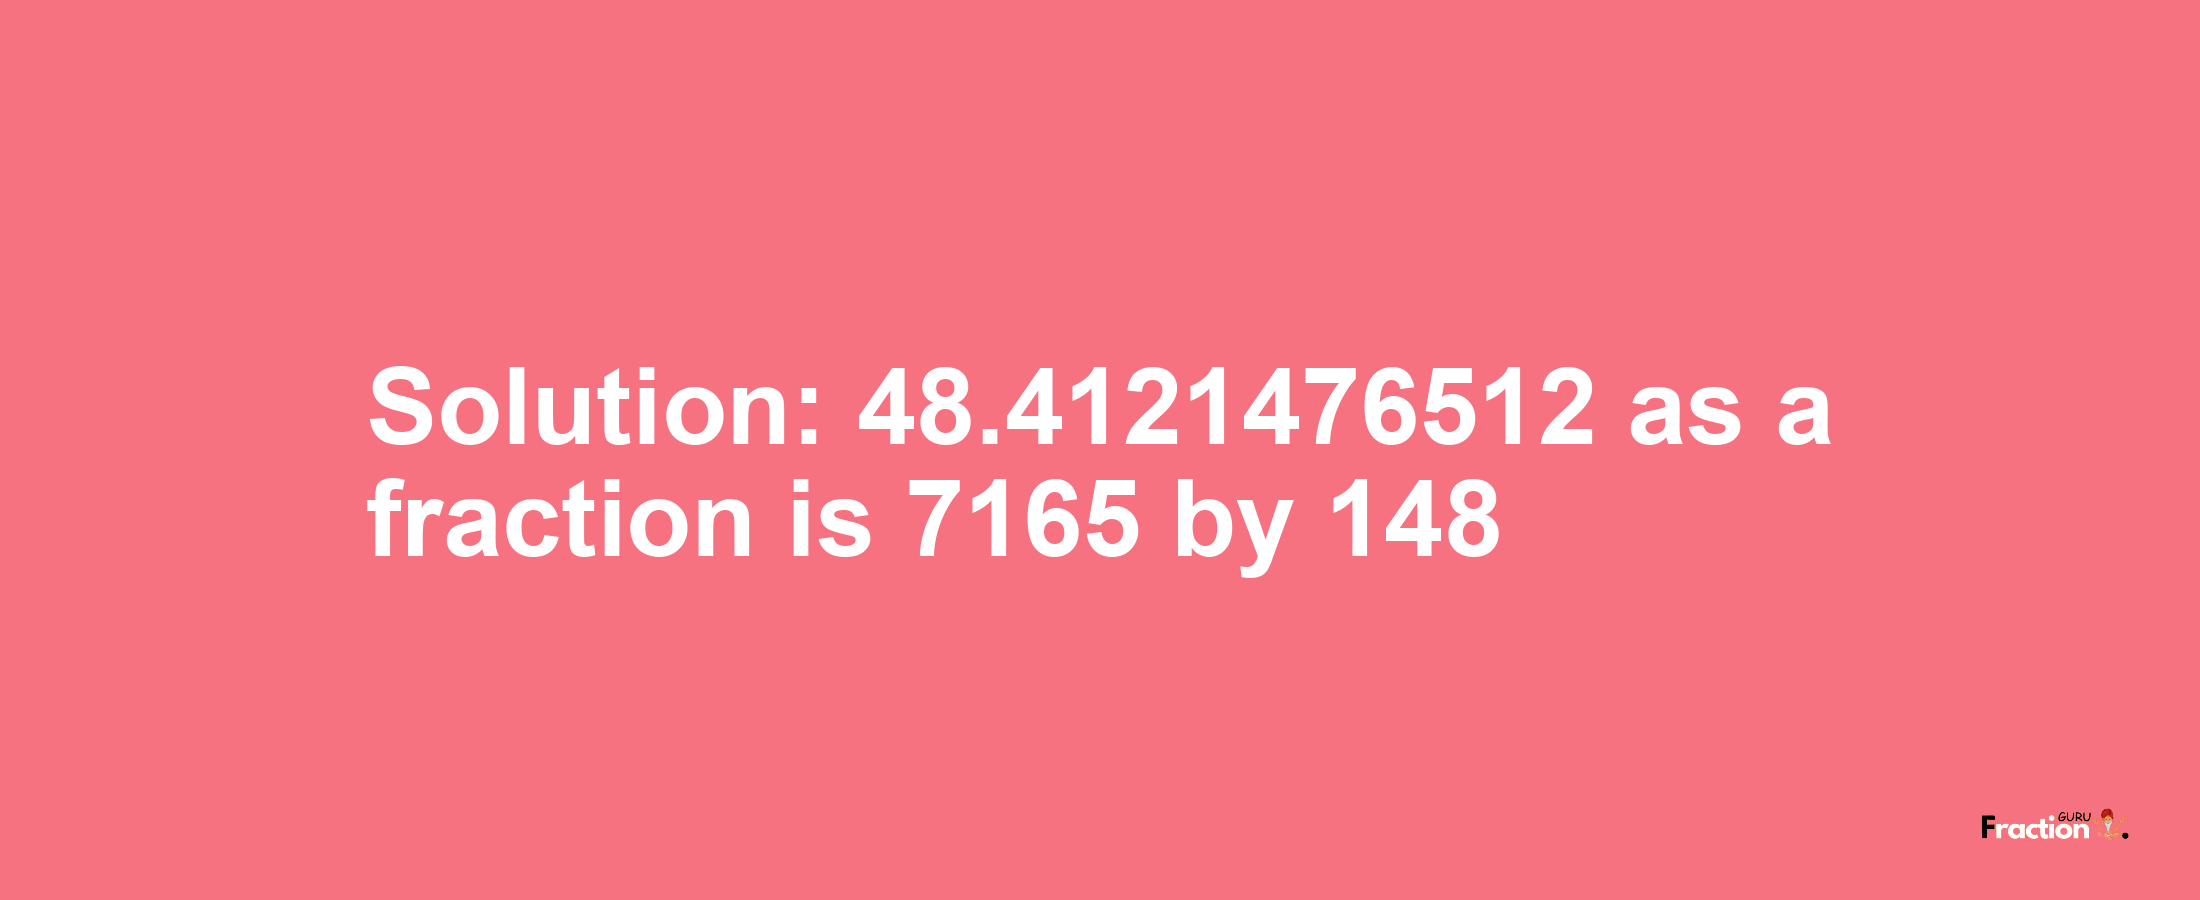 Solution:48.4121476512 as a fraction is 7165/148